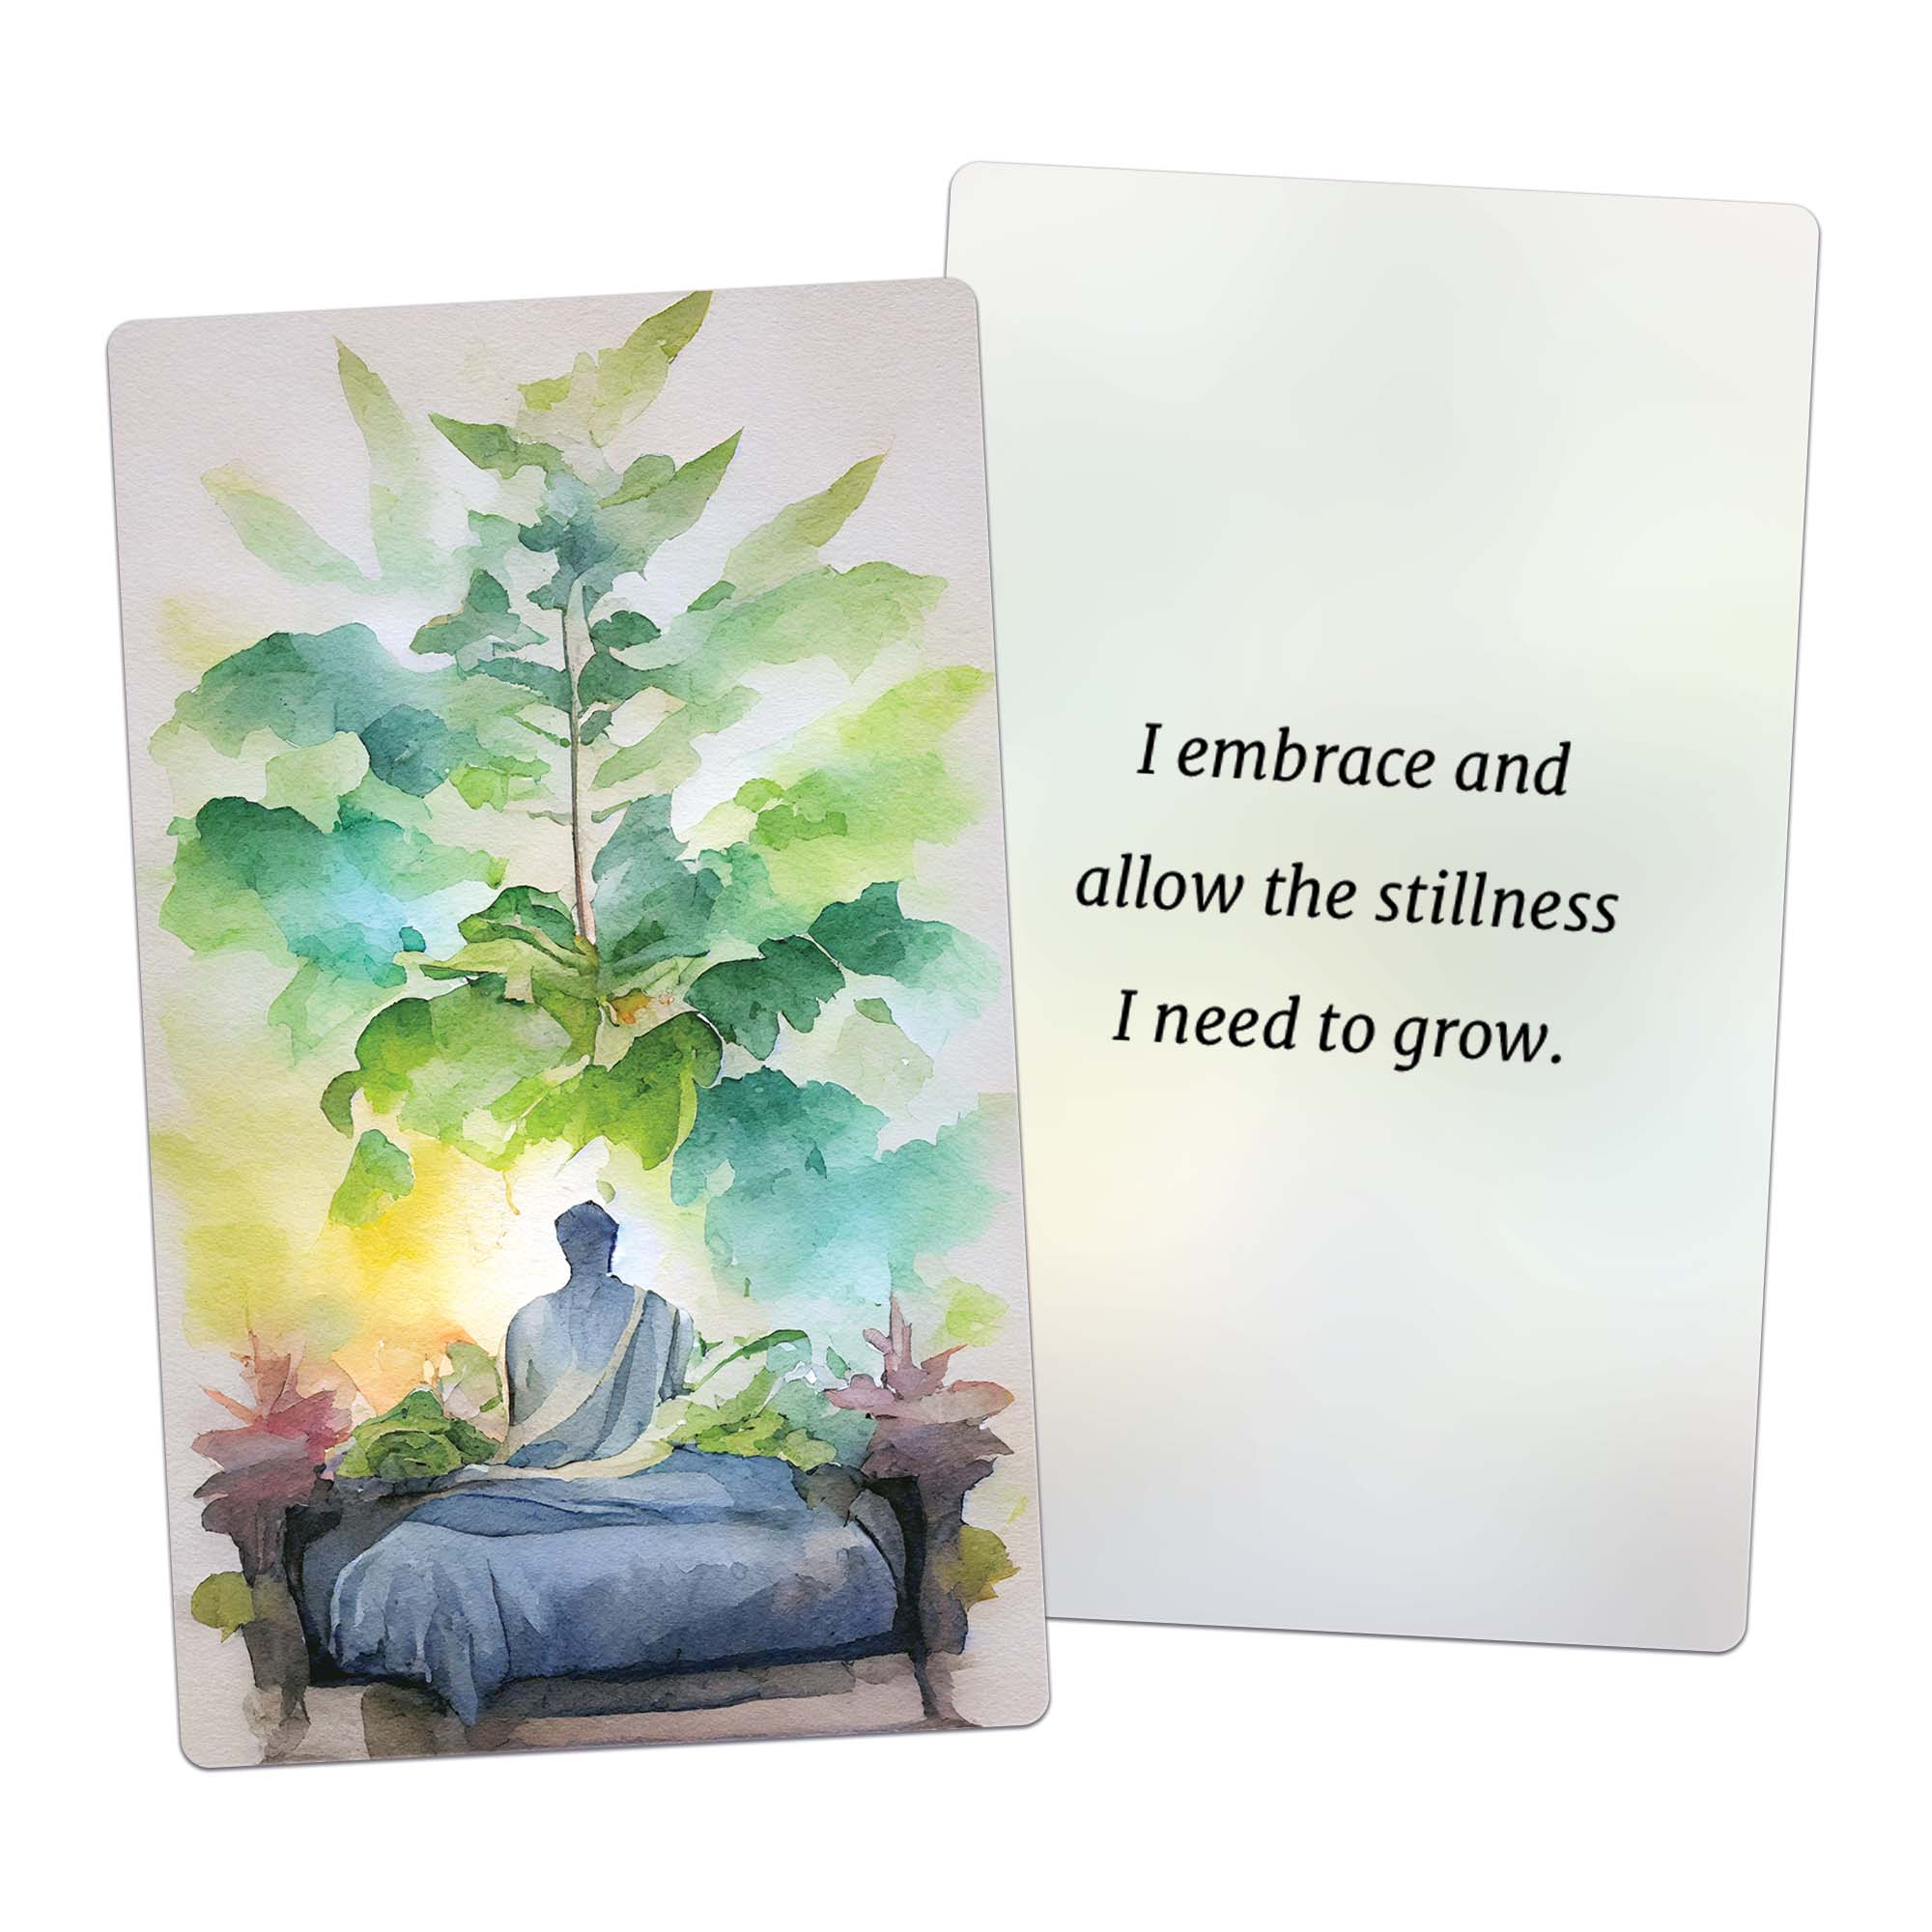 I embrace and allow the stillness I need to grow.